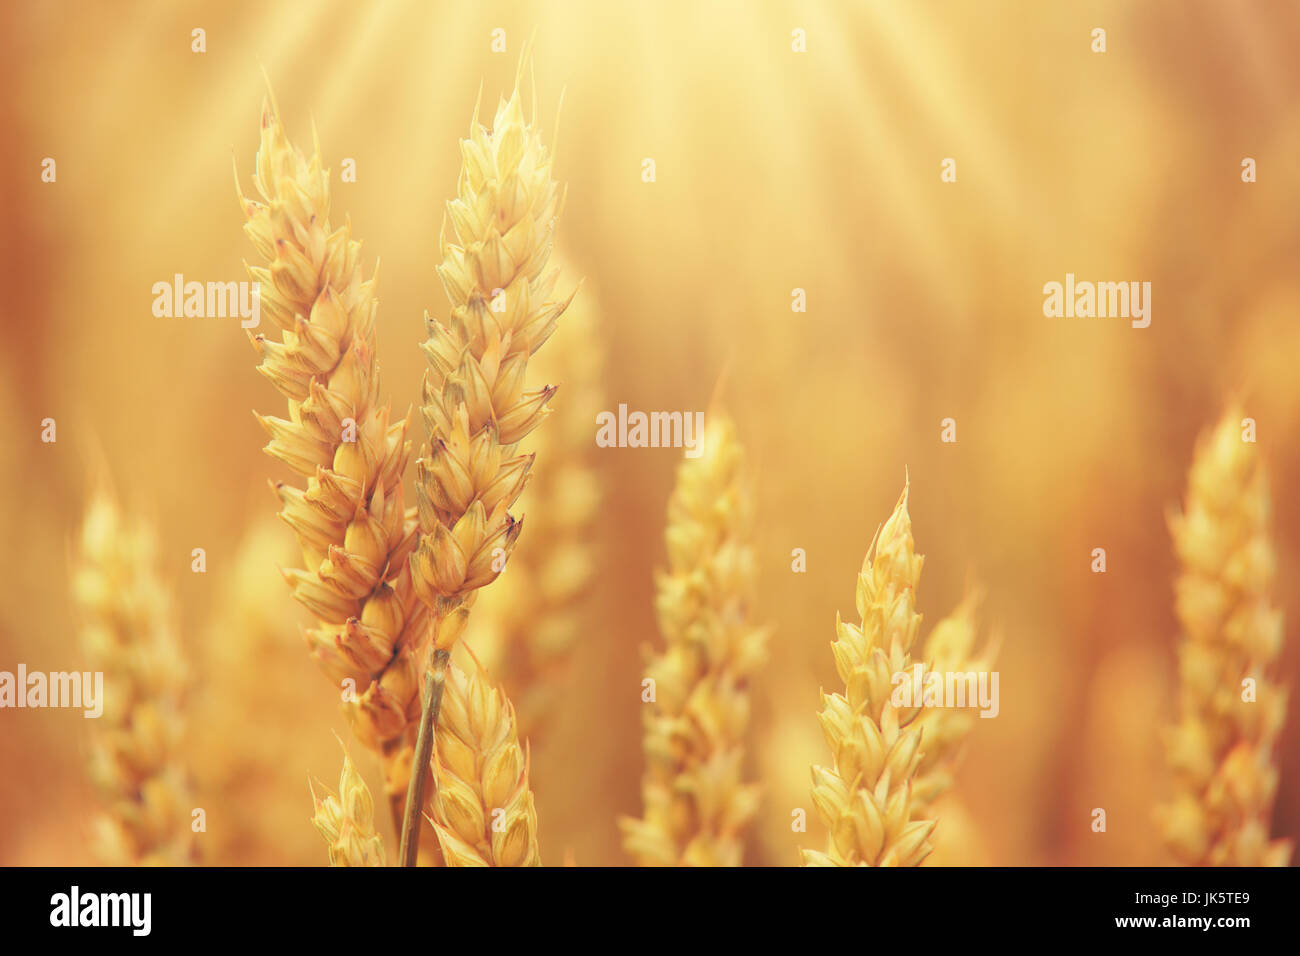 Ripe wheat close-up. Spikelets of golden wheat on sunny bokeh. Sunny autumn background. Stock Photo